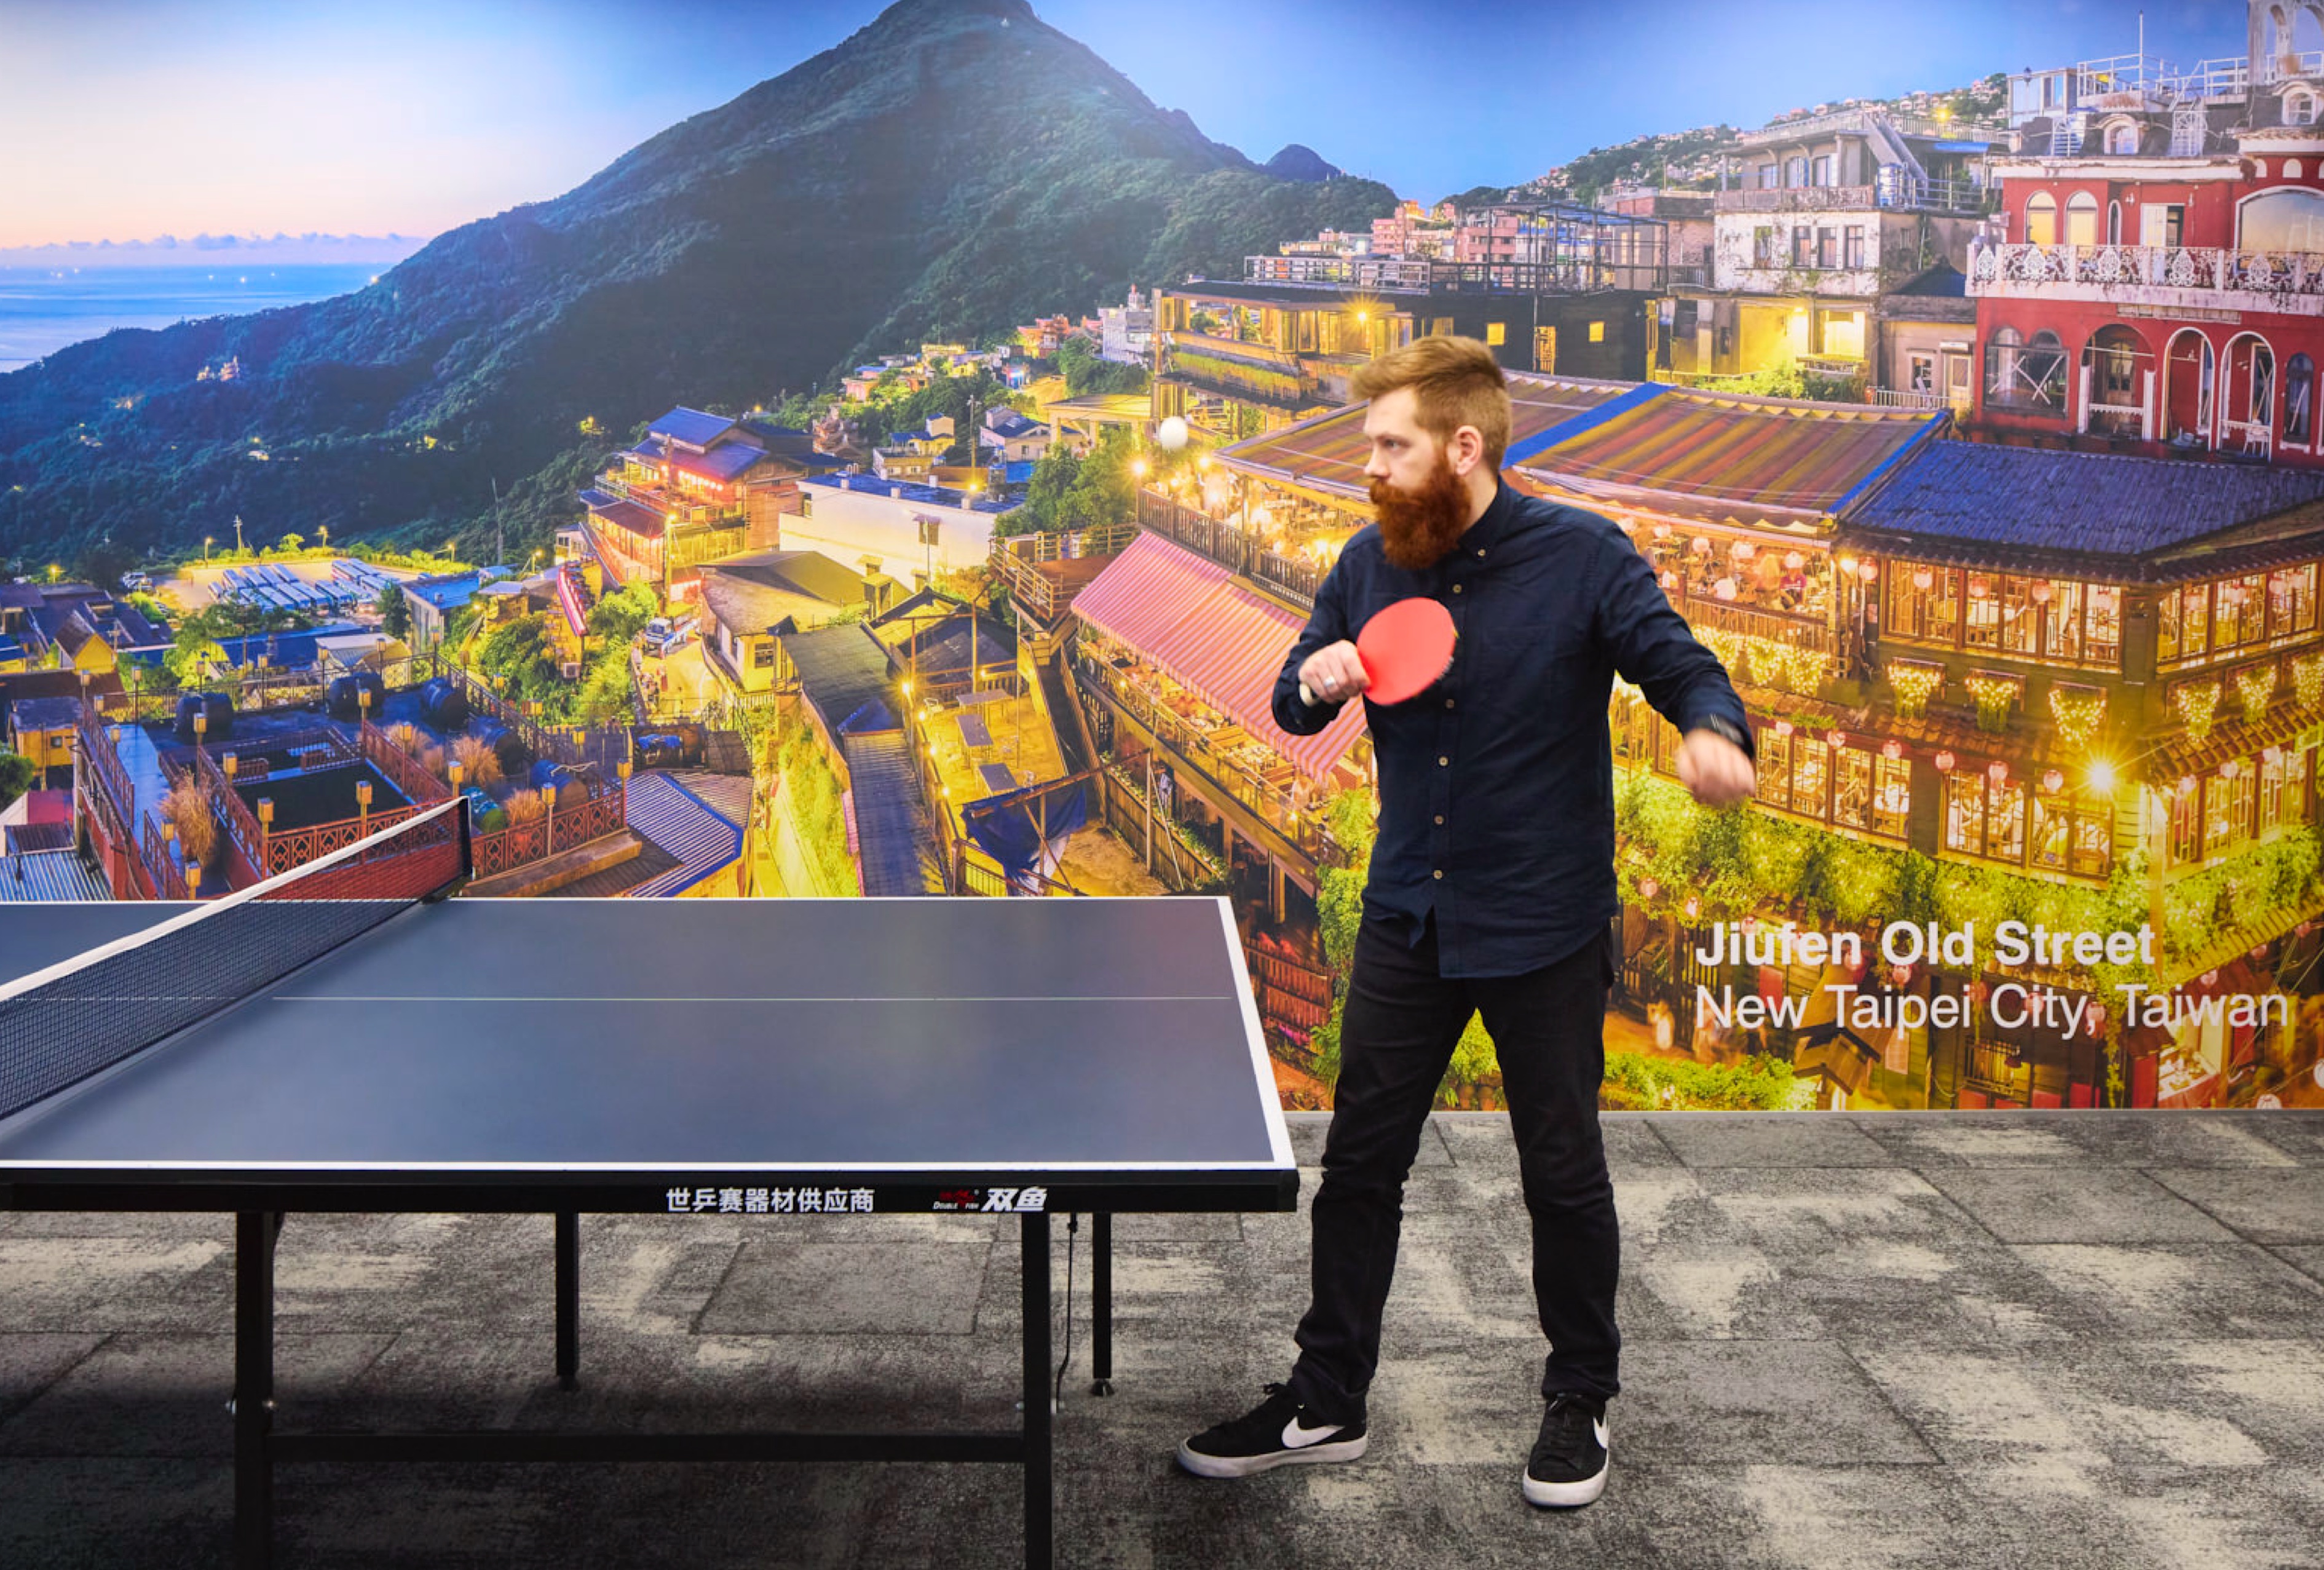 Man playing table tennis with supergraphic of Jiufen Old Street in background